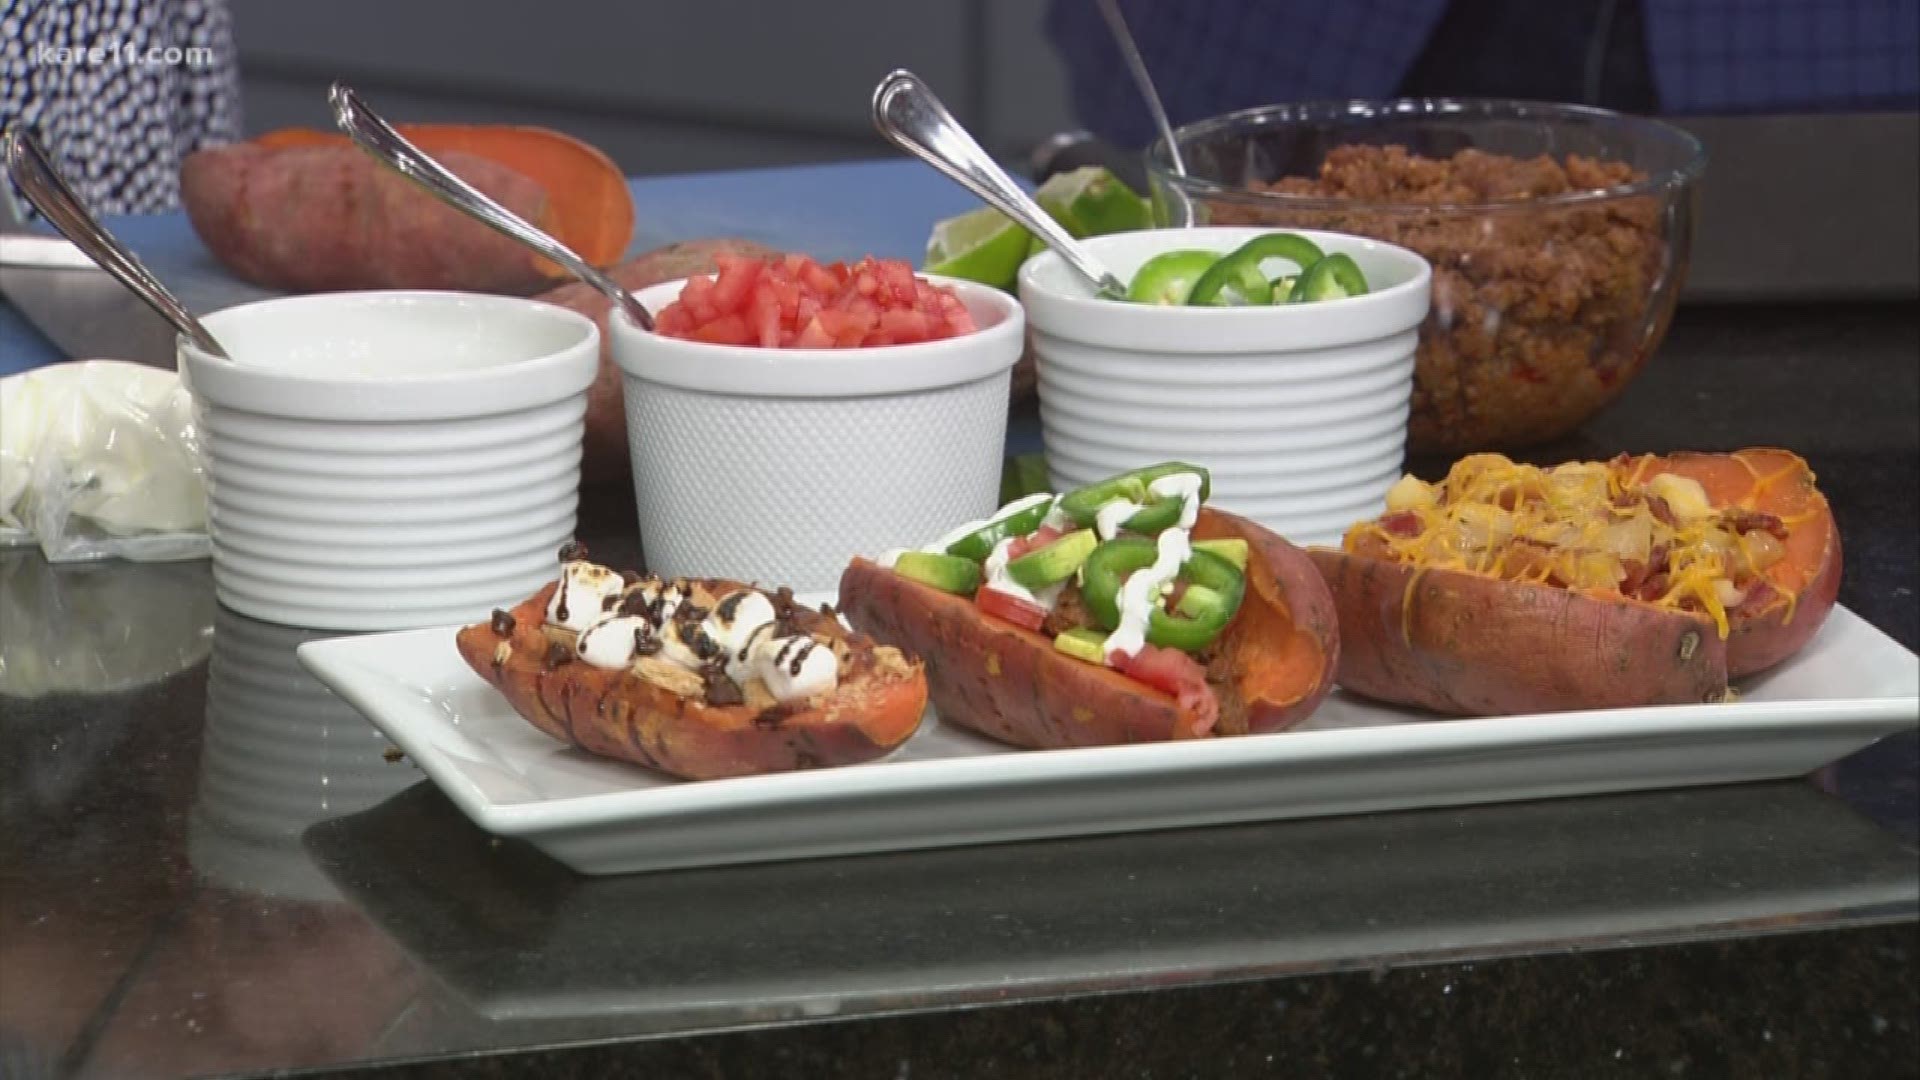 Dietitian Melissa Jaeger will show you how to turn this classic side dish into the star of the show with three delicious stuffed sweet potato recipes.